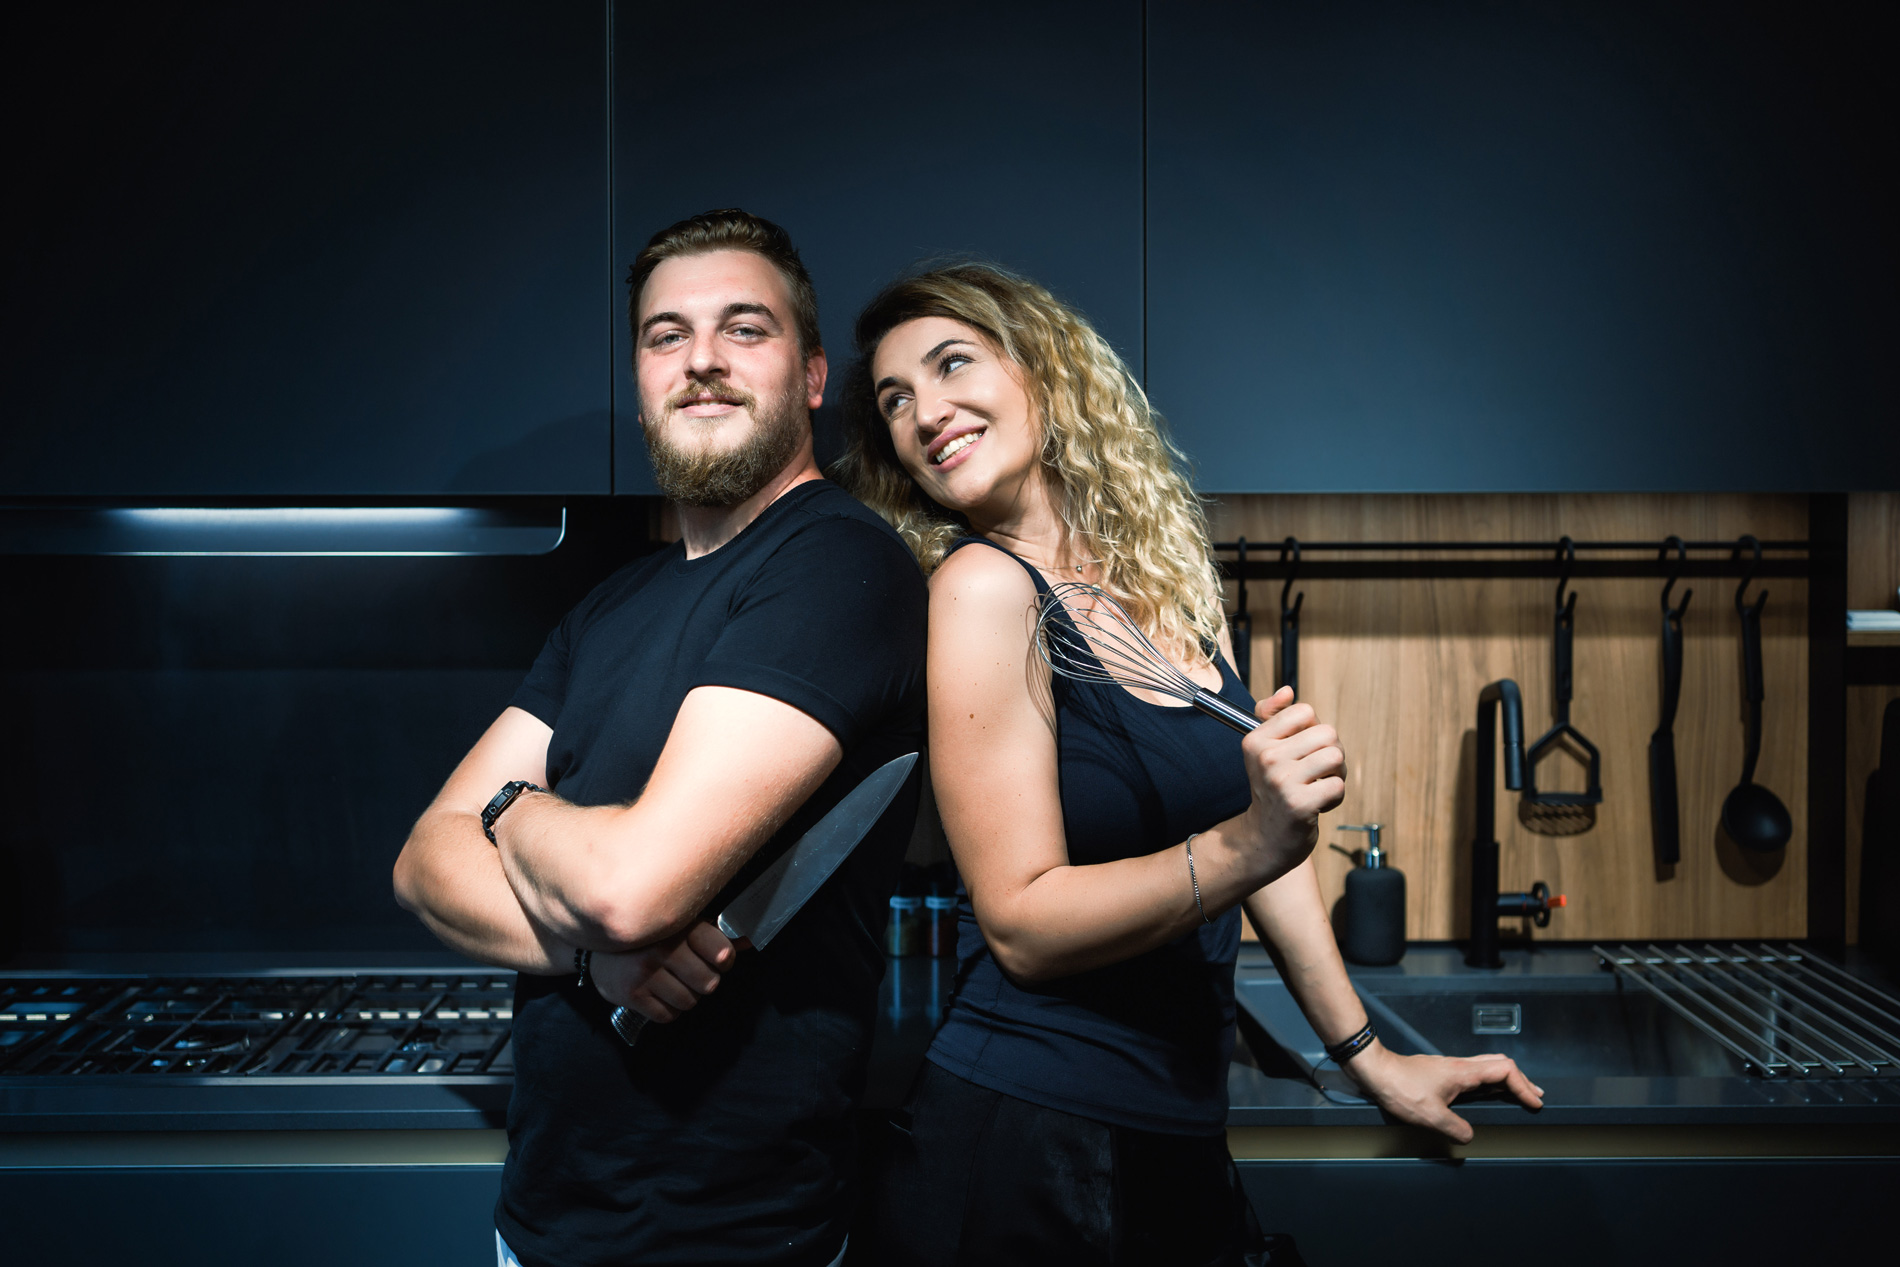 Synesthesia in the kitchen. About their new home kitchen and the art of cooking with Alex and Laura, chefs at Kaiamo restaurant